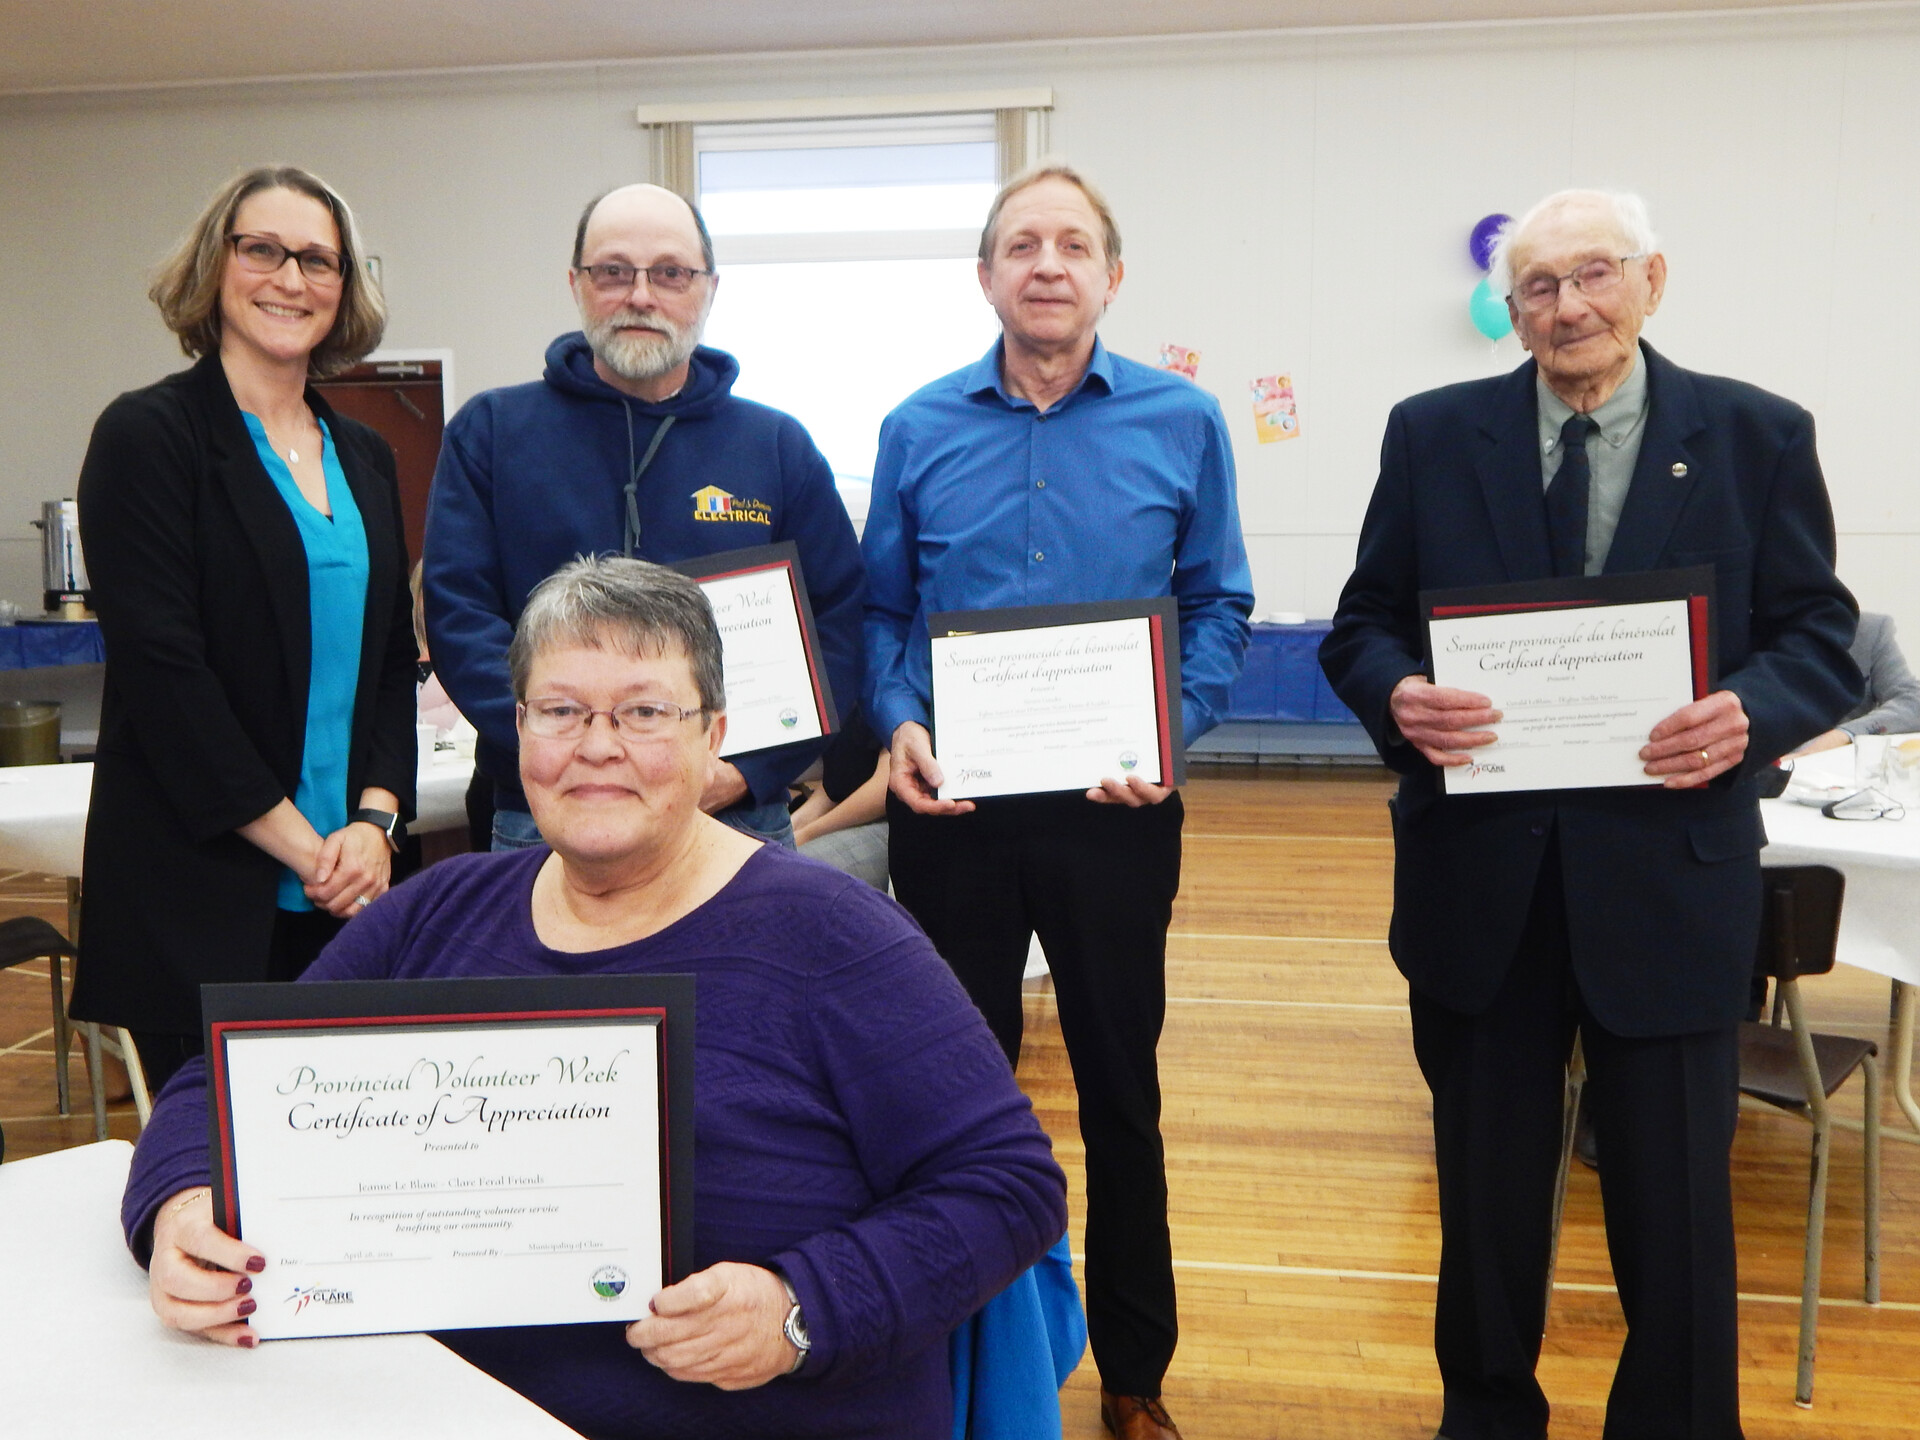 Clare Volunteer Award recipients for 2022 Back row, left to right: Councillor Nadine Comeau, Paul Deveau, Steven Gaudet andd Gerald LeBlanc Seated: Jeanne LeBlanc Absent: Yvonne and Gil Frechette, Jennifer Gaudet and Jean Gauvin